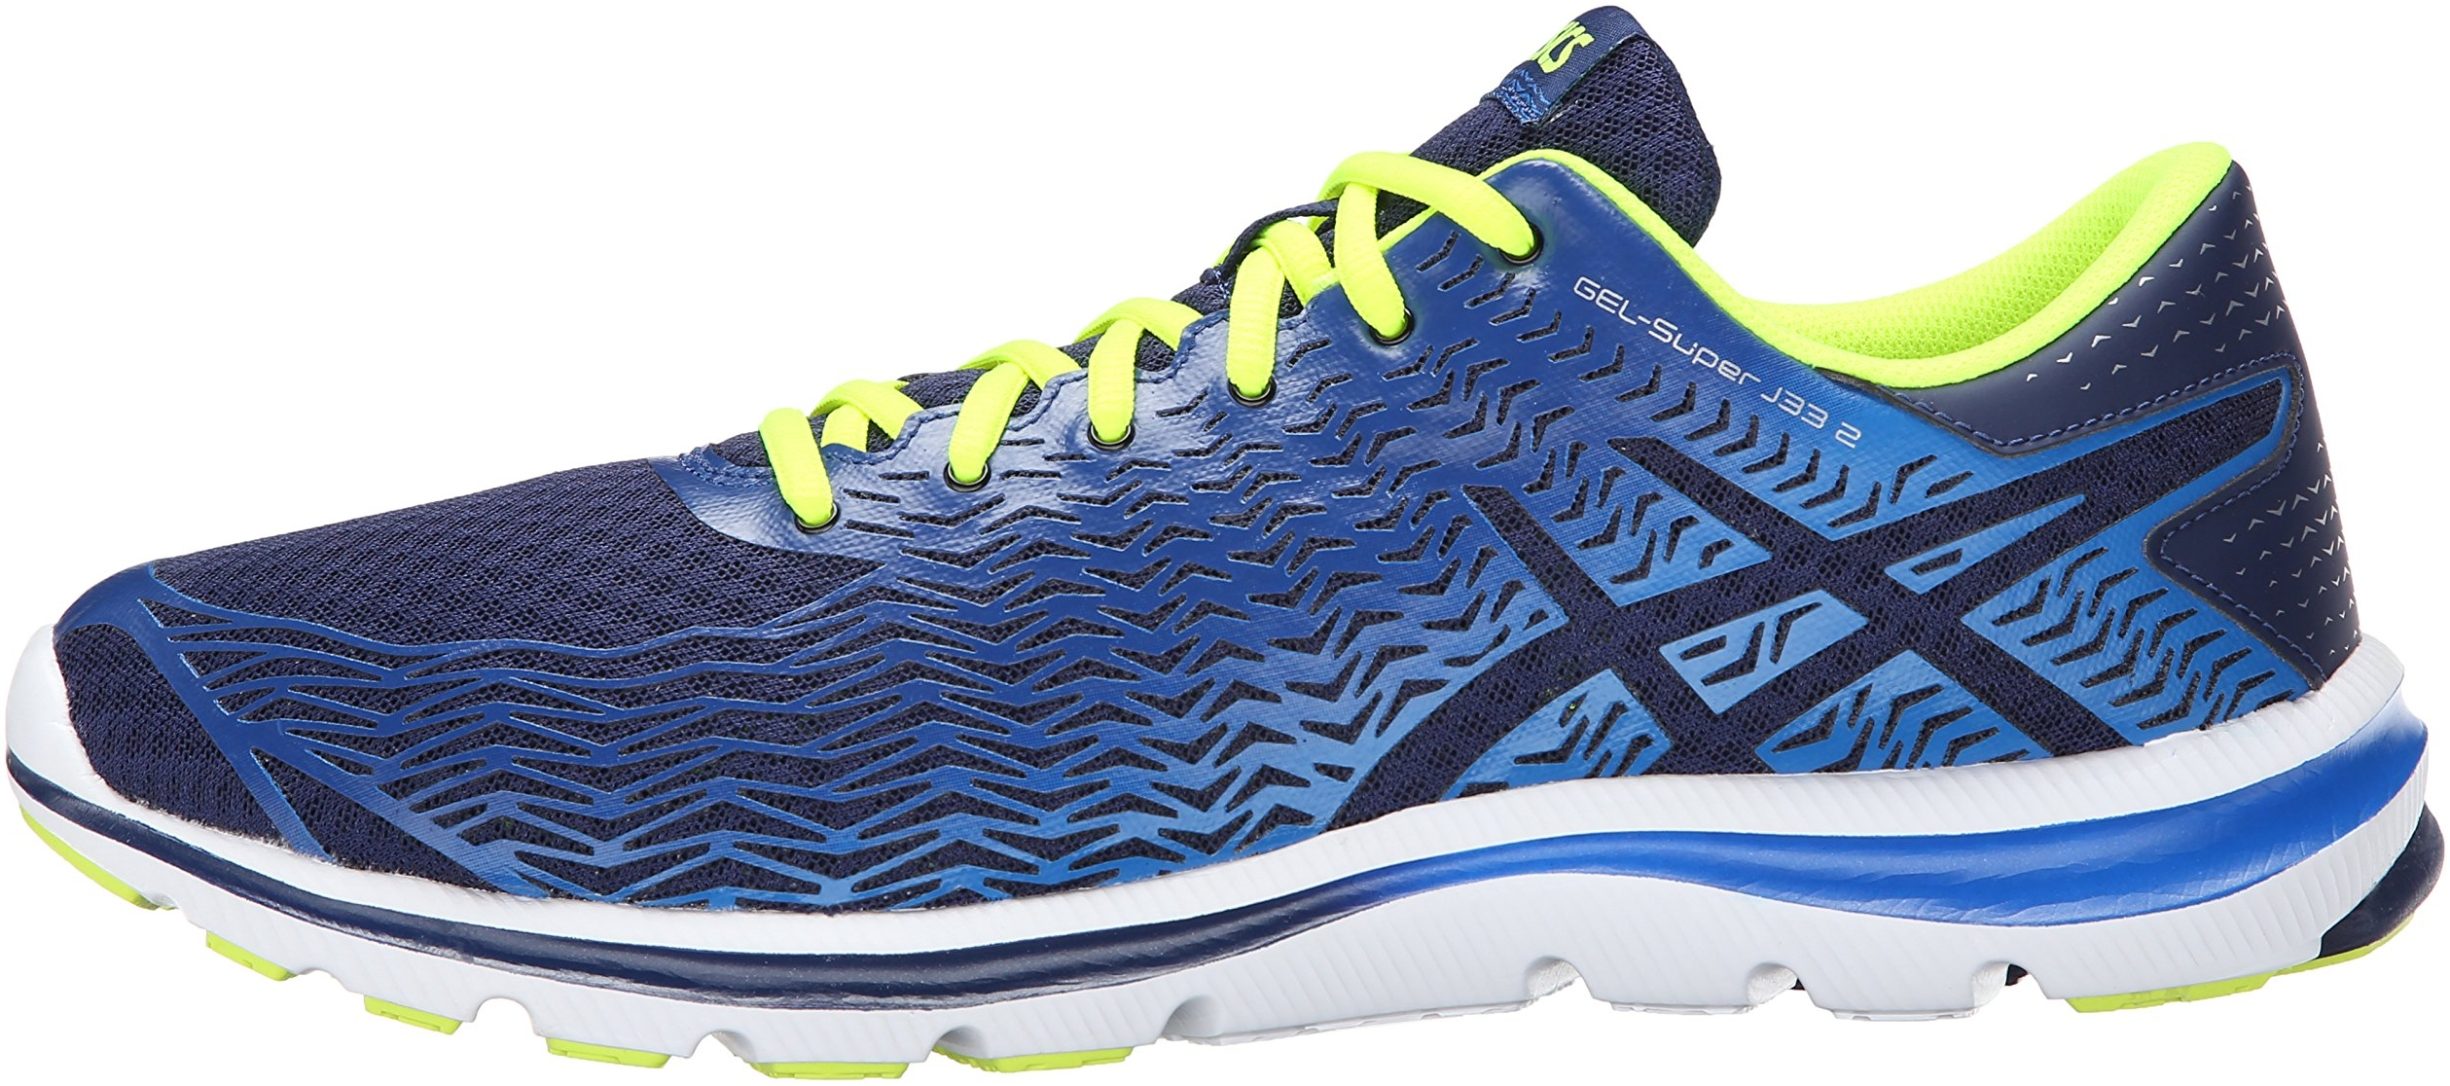 Only $62 + Review of Asics Gel Super J33 2 | RunRepeat